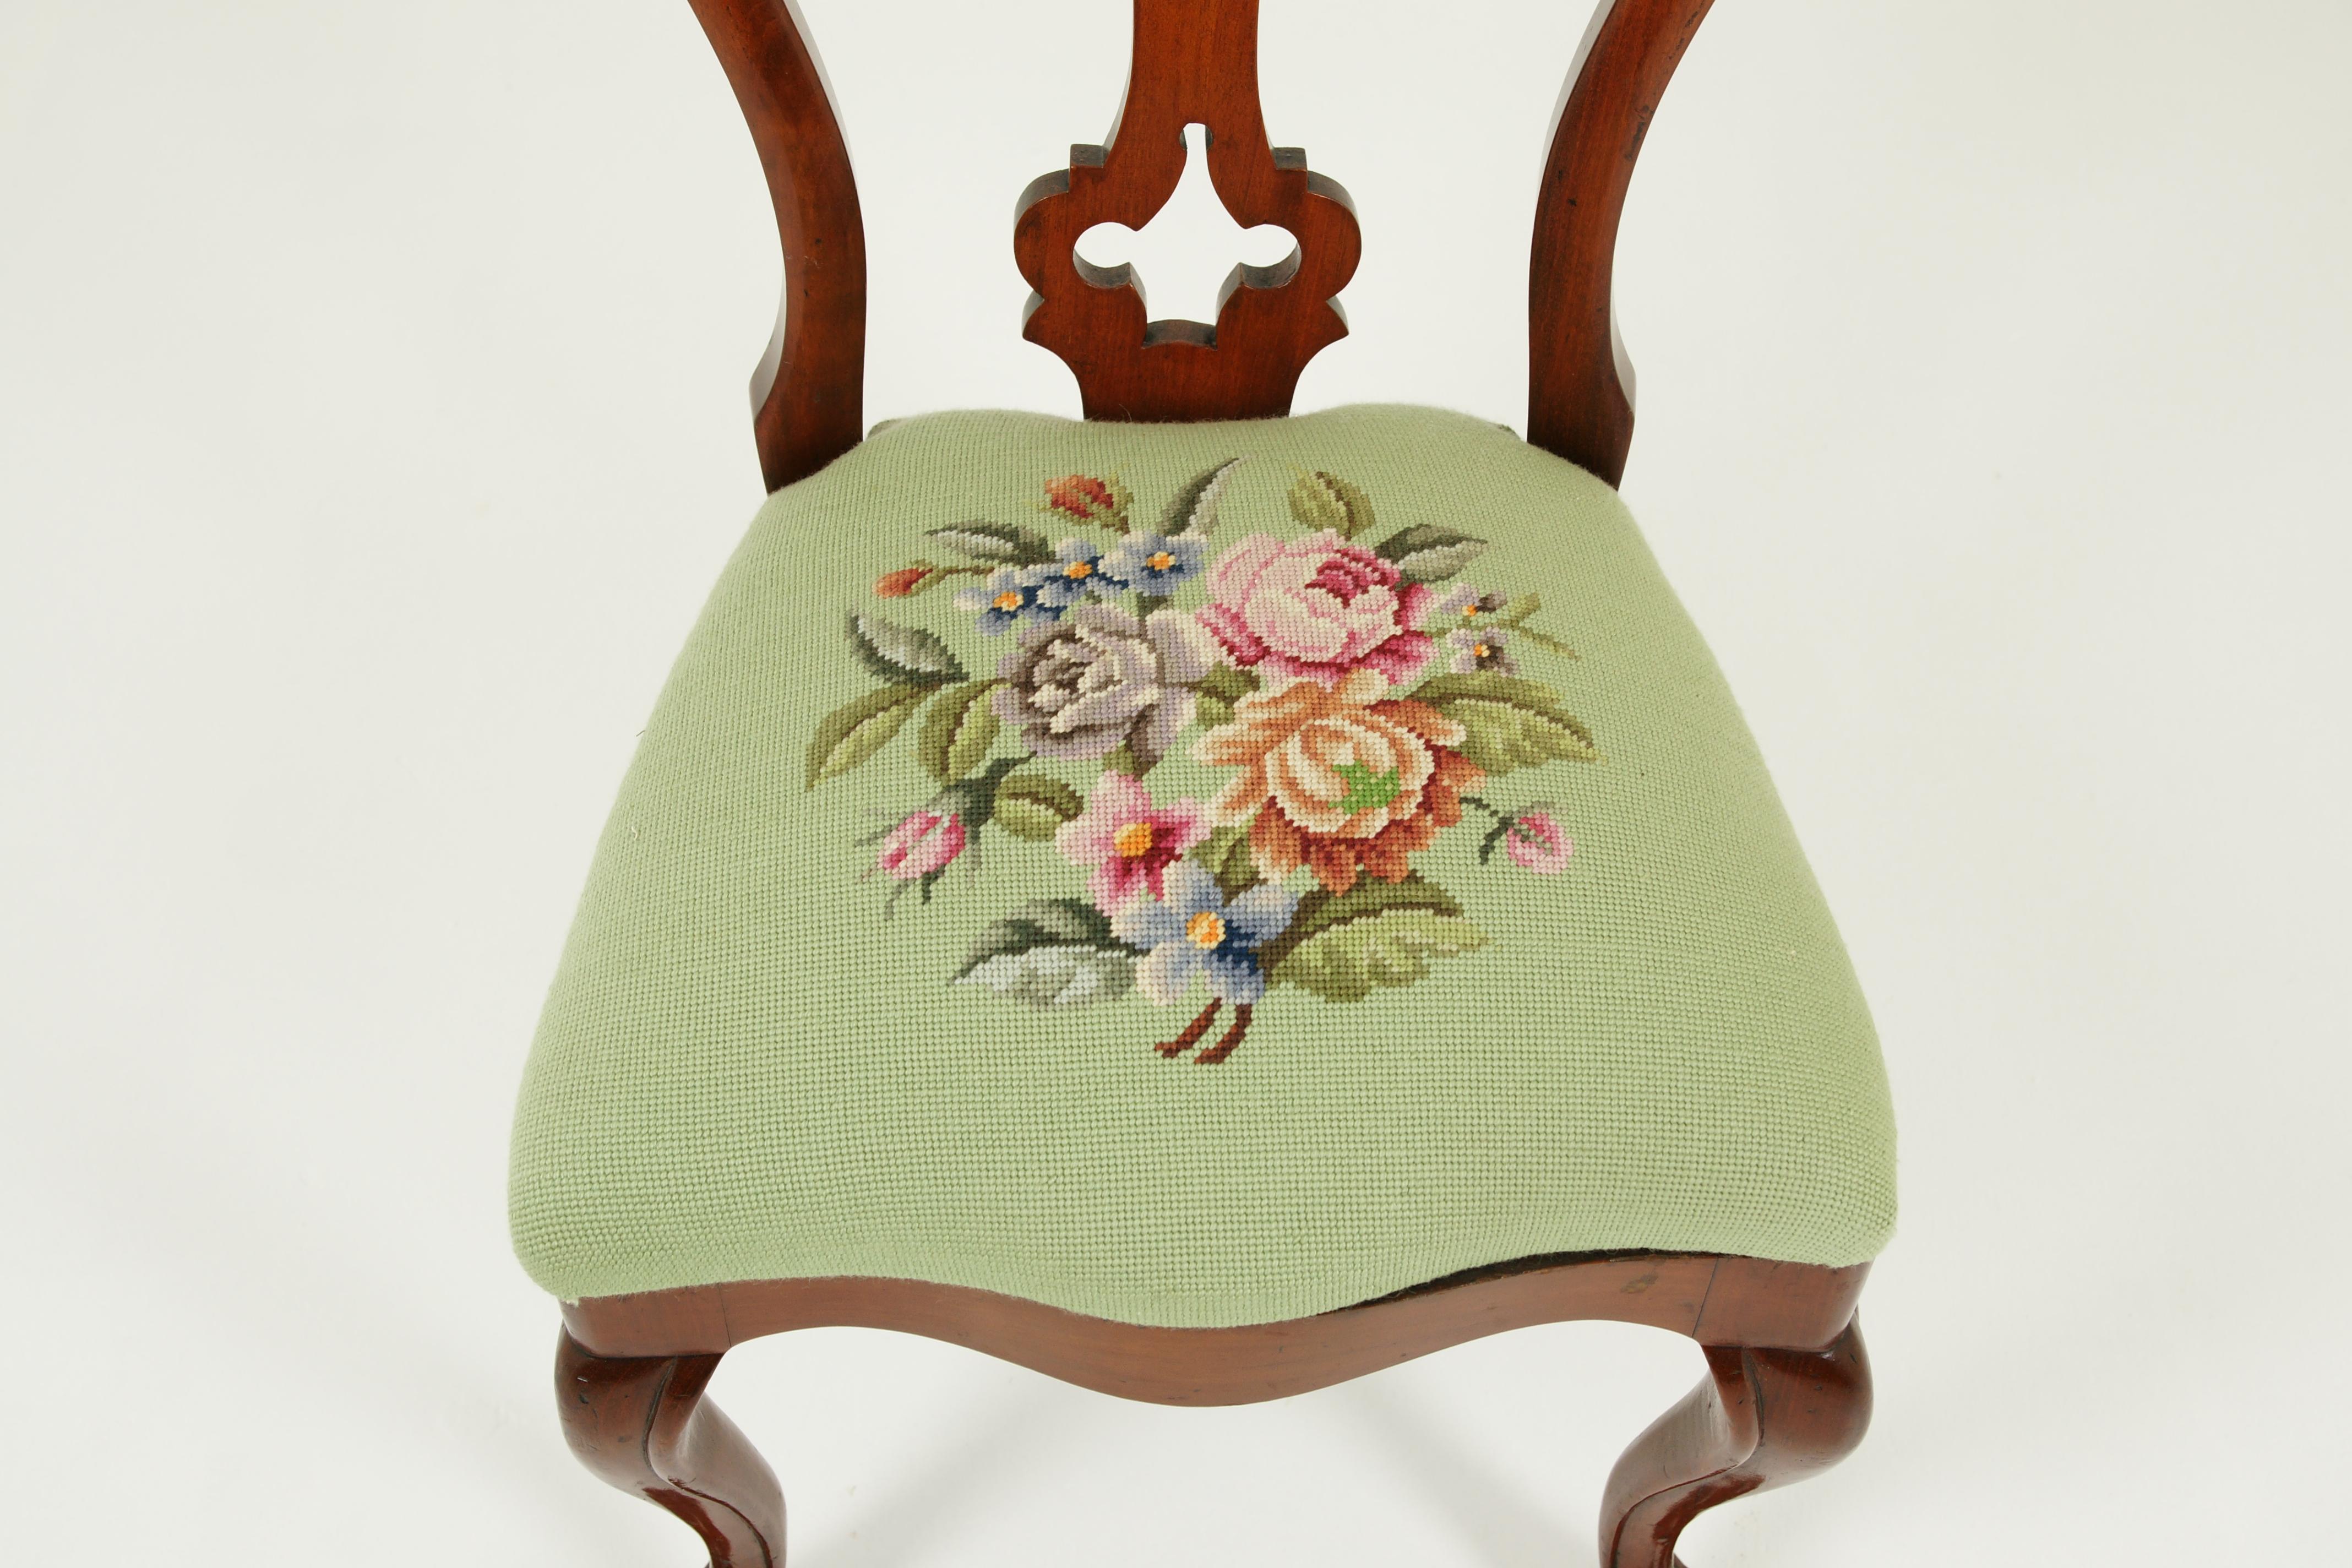 Antique Needlepoint chair, shabby chic, Austria 1880, Antique Furniture, B1567

Austria 1880
Solid walnut
Shaped top
Open back
Serpentine lift out needlepoint seat
Ending on Cabriole legs
Very good condition

$295

B1567
Measures: 19